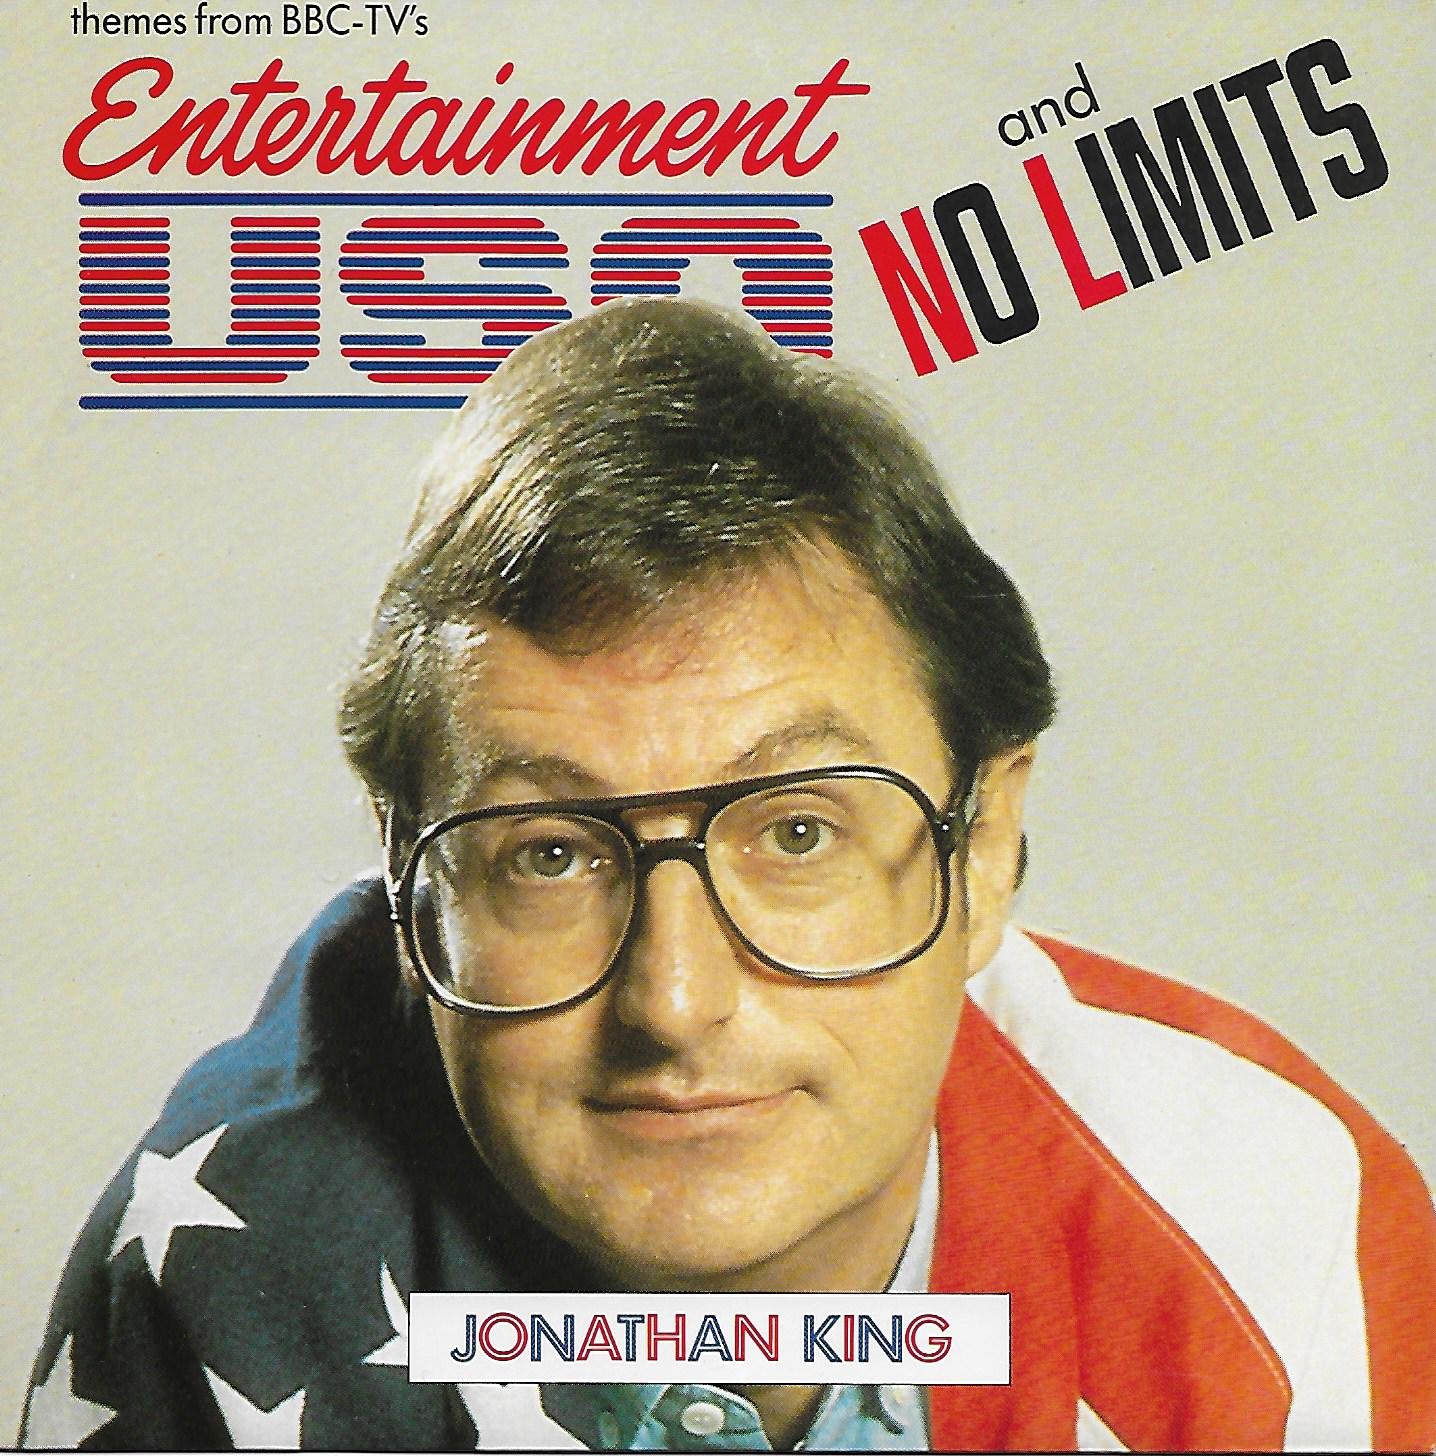 Picture of RESL 218 I'll slap your face (Entertainment USA) by artist Jonathan King from the BBC records and Tapes library